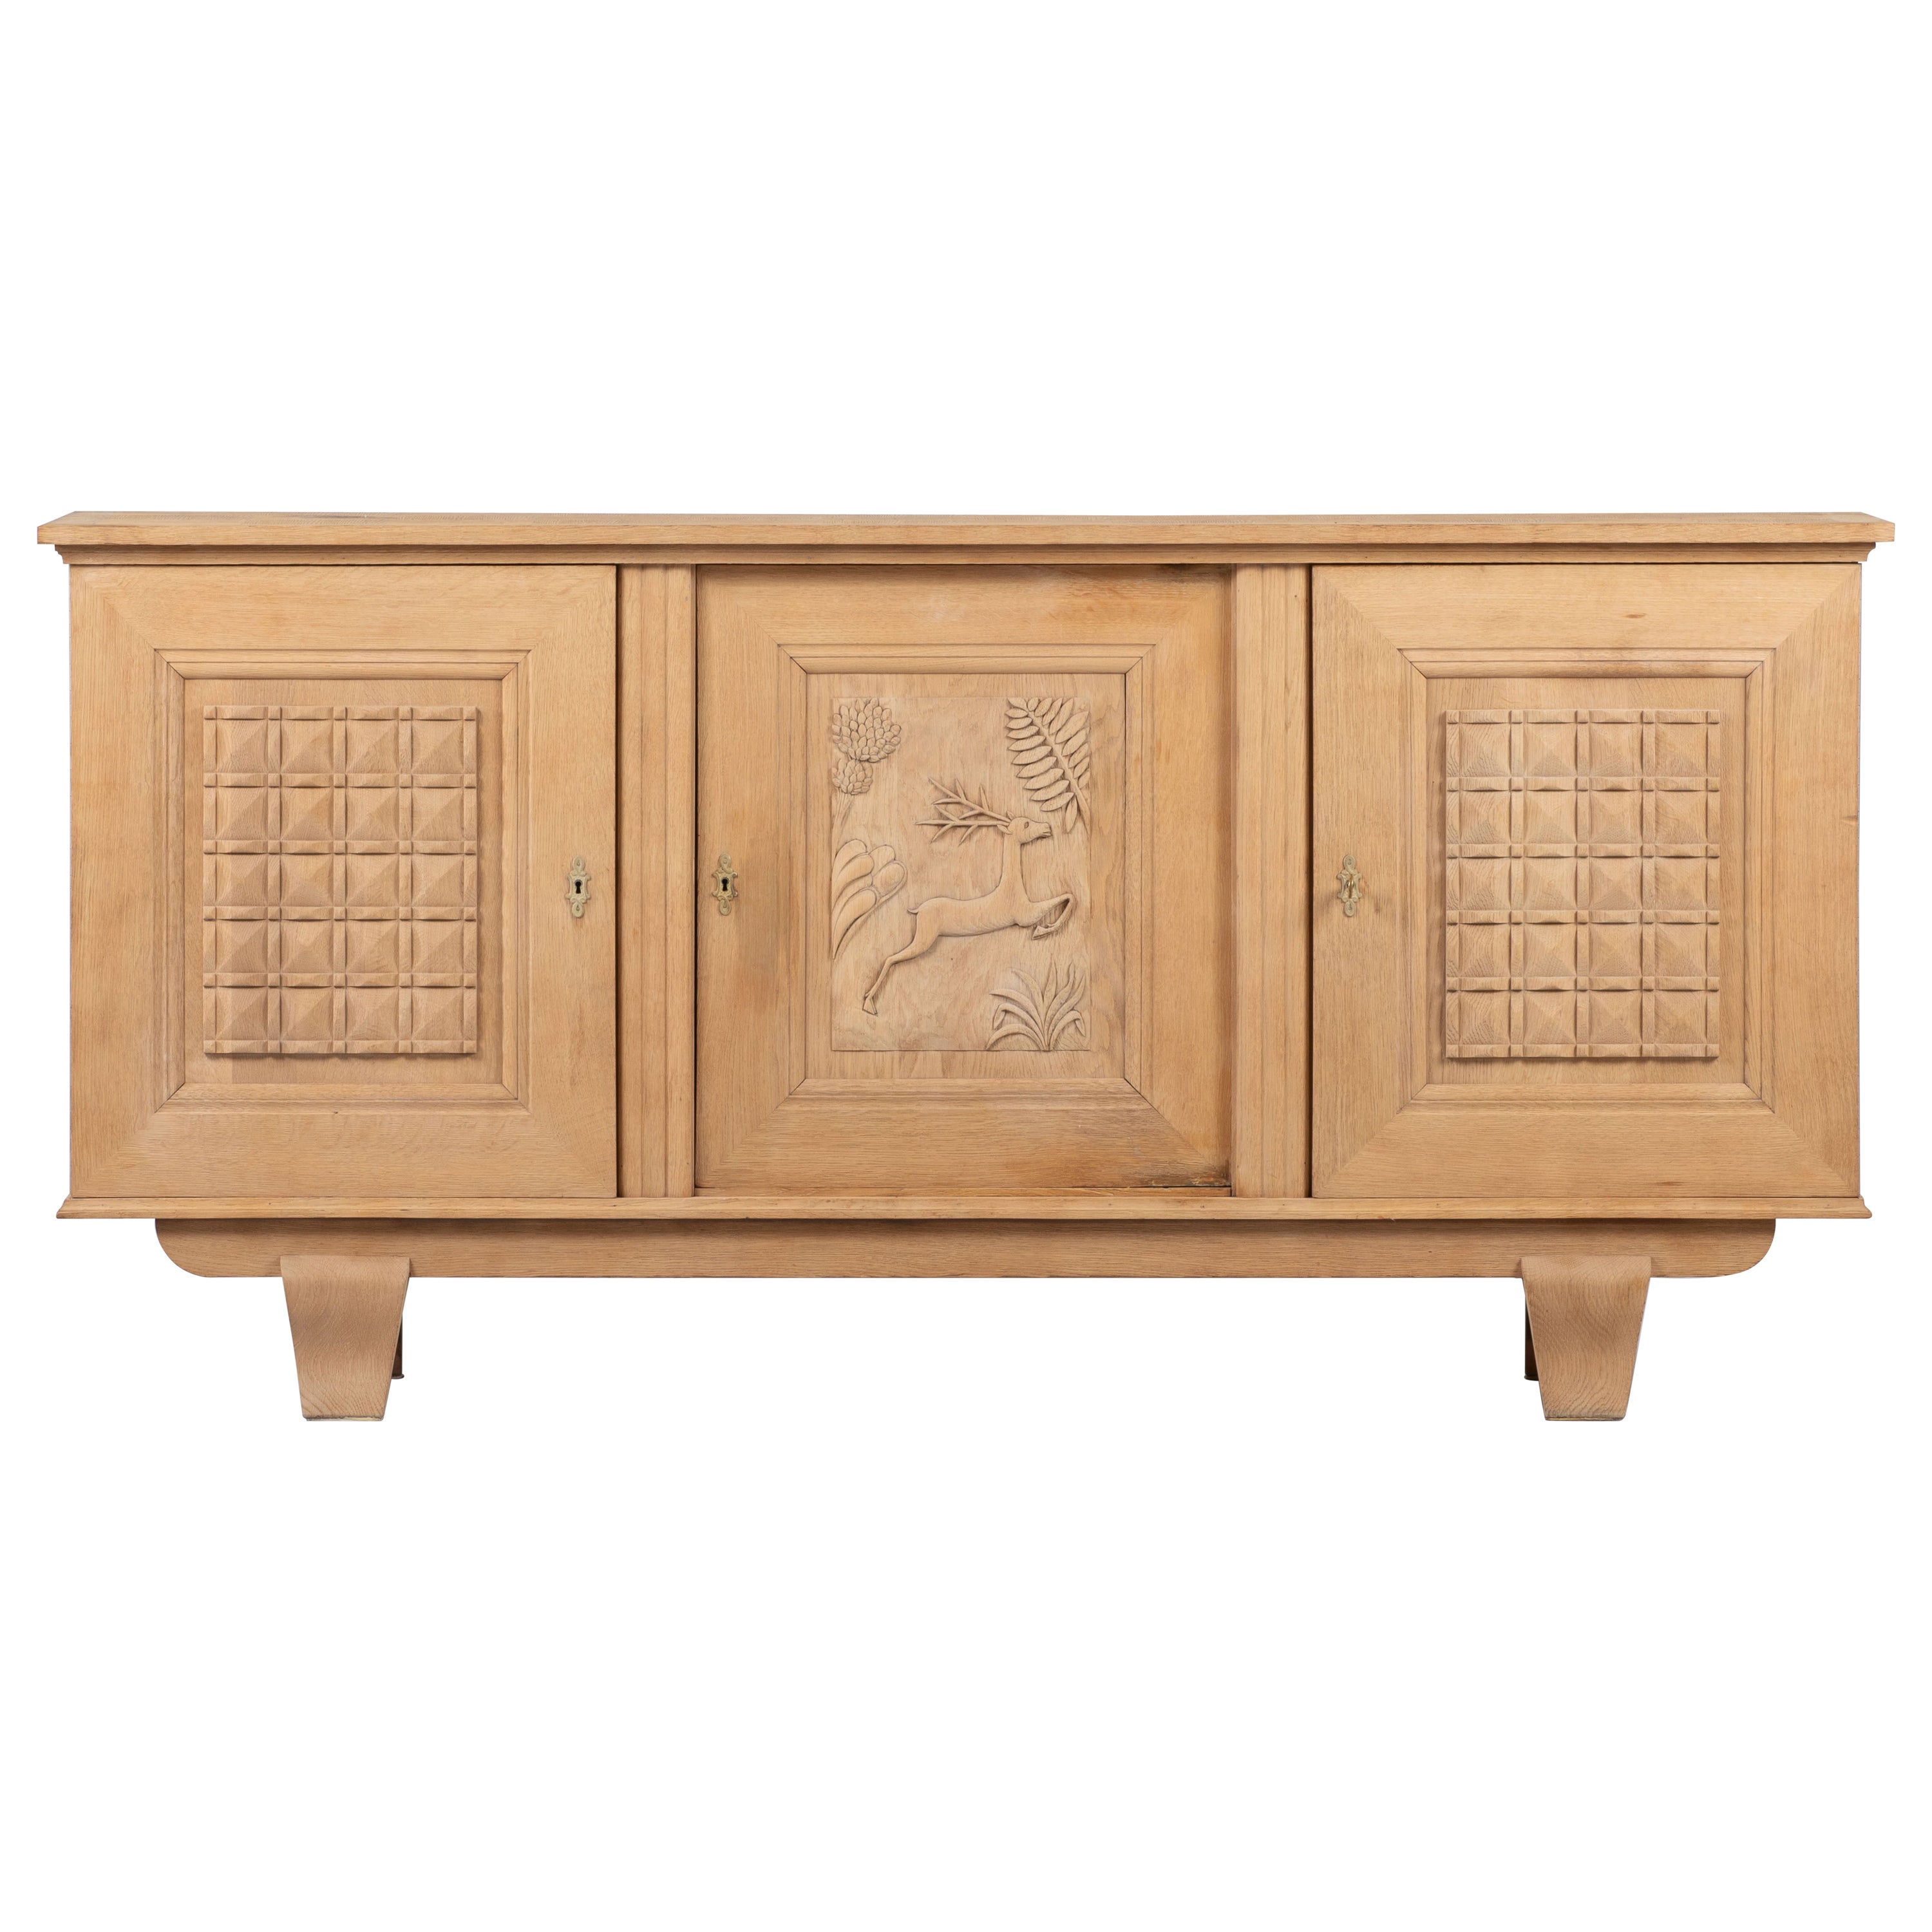 Mid-Century Credenza in Solid Oak, Rustic, France, 1940s For Sale